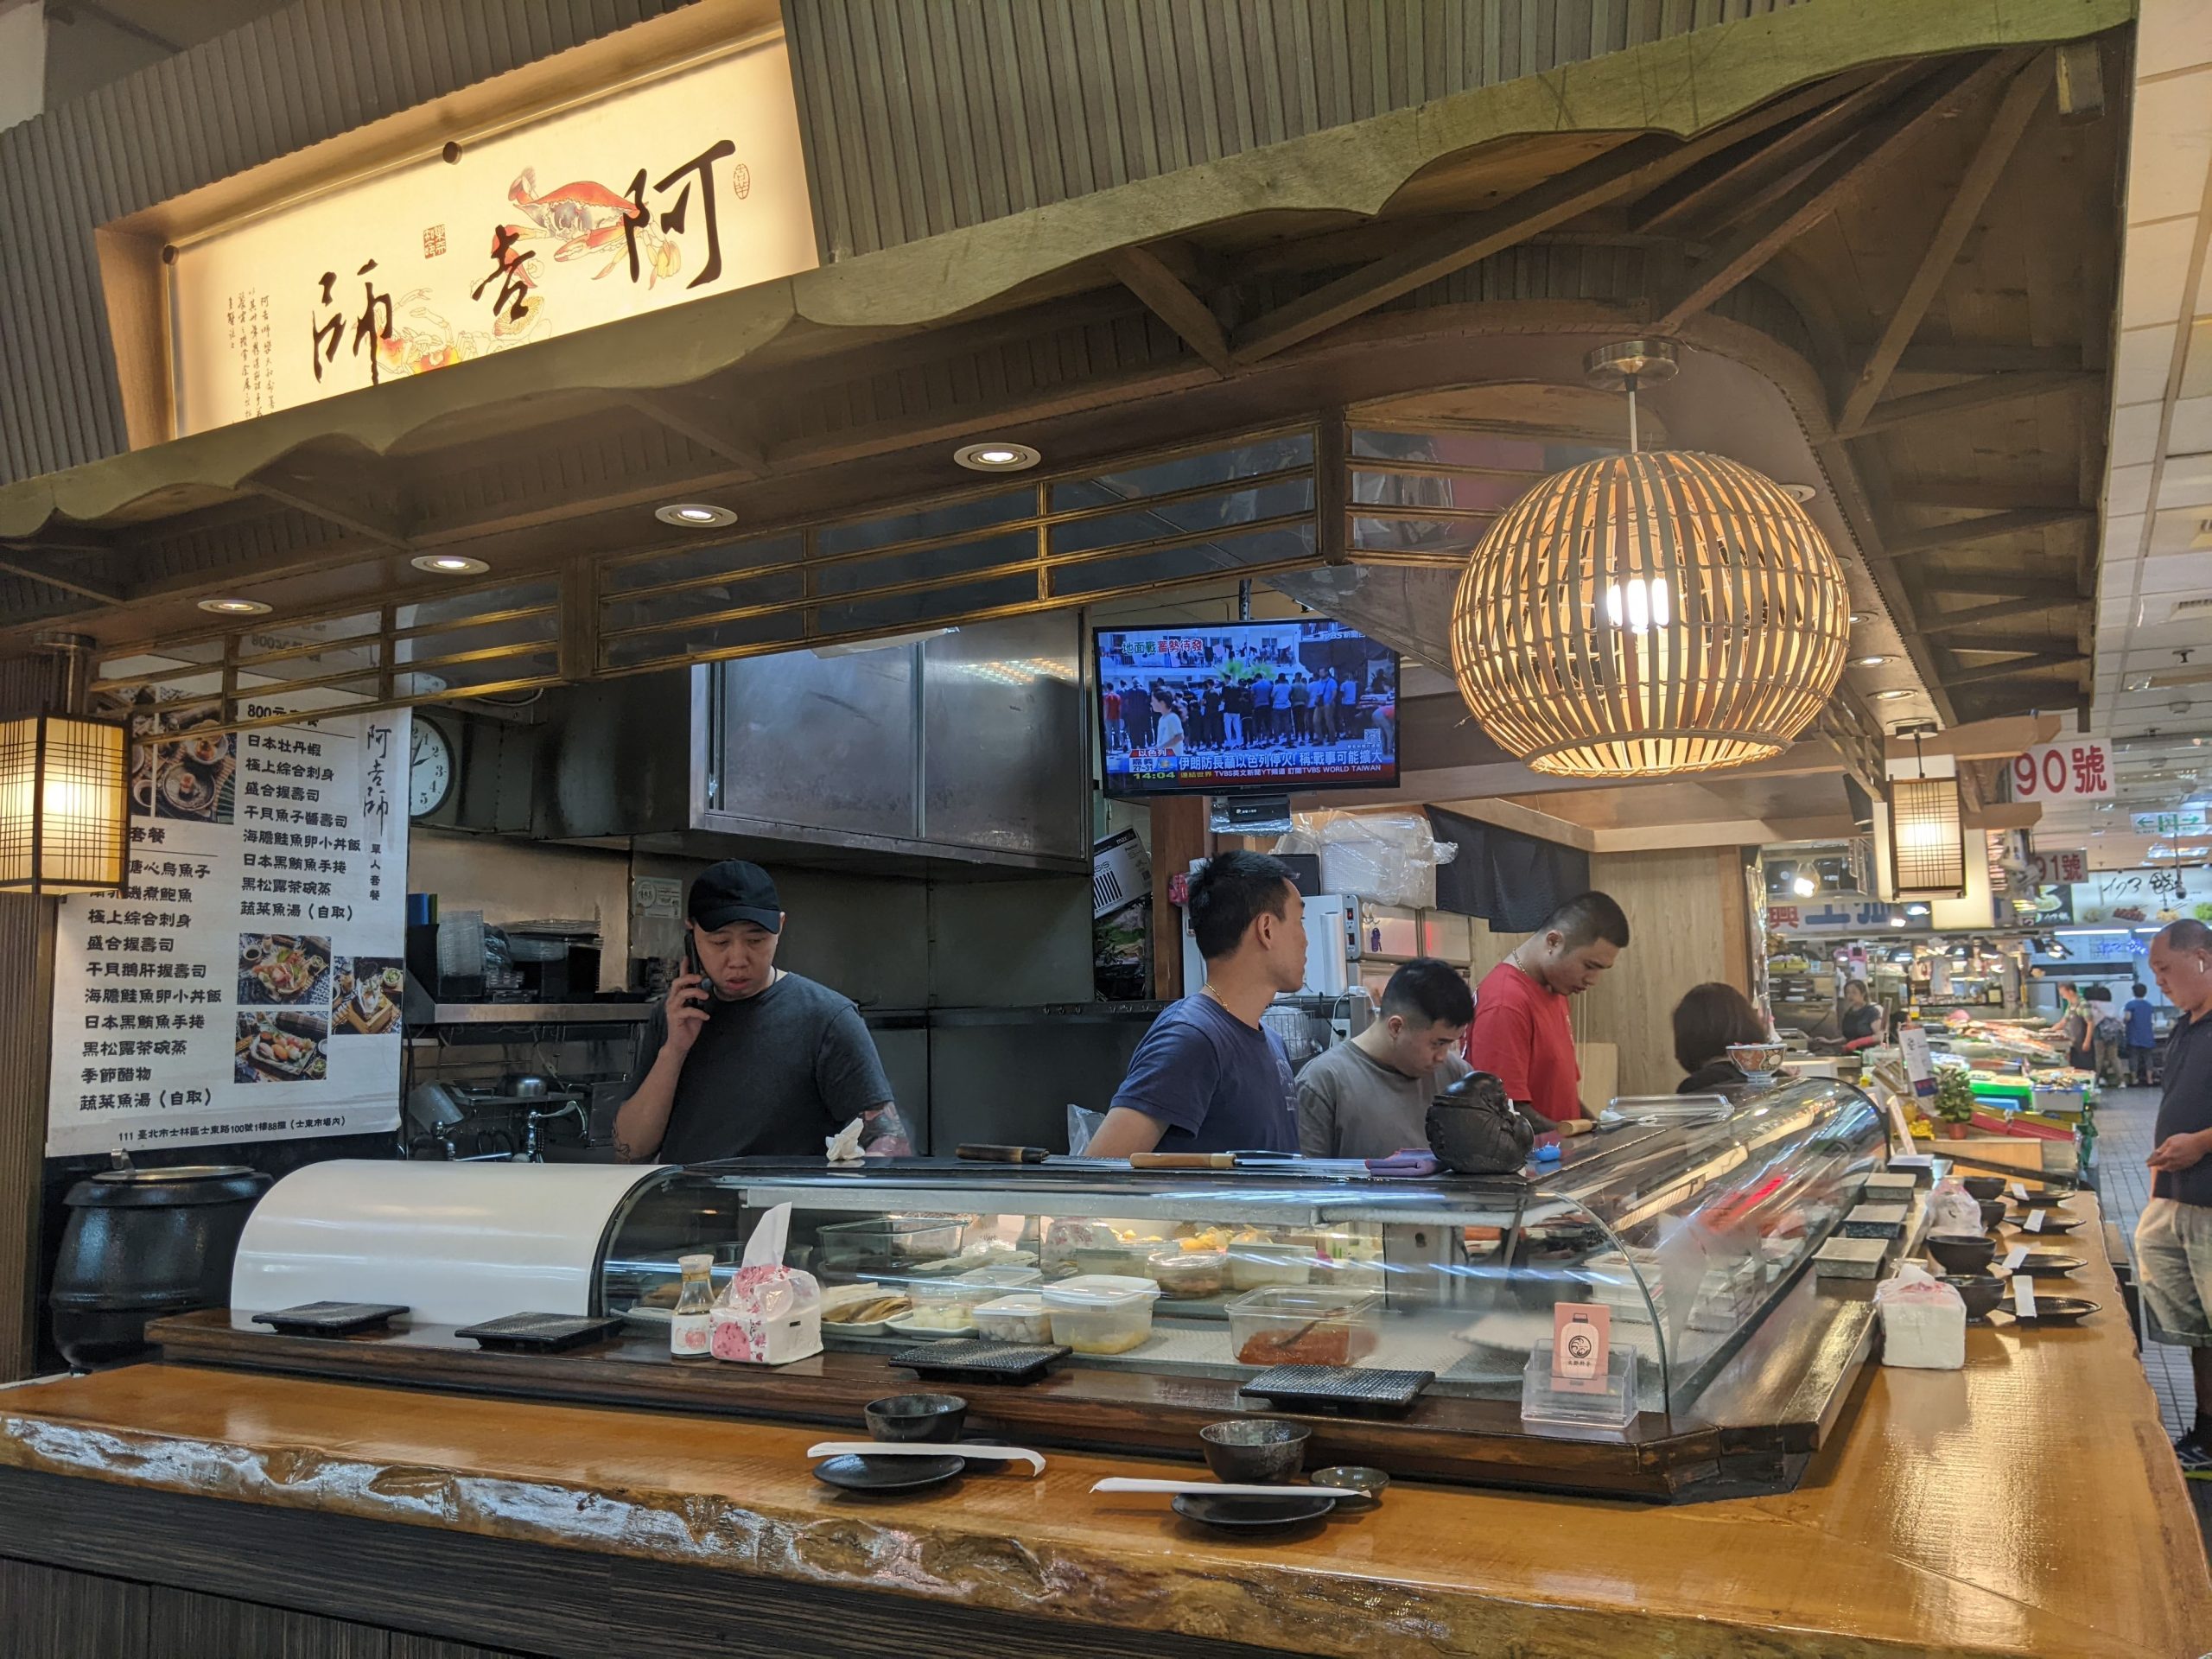 A-ji-shi stand-up sashimi restaurant at Shi-Dong Market offers a unique dining experience. (Photo・Jonathan Kaplan)